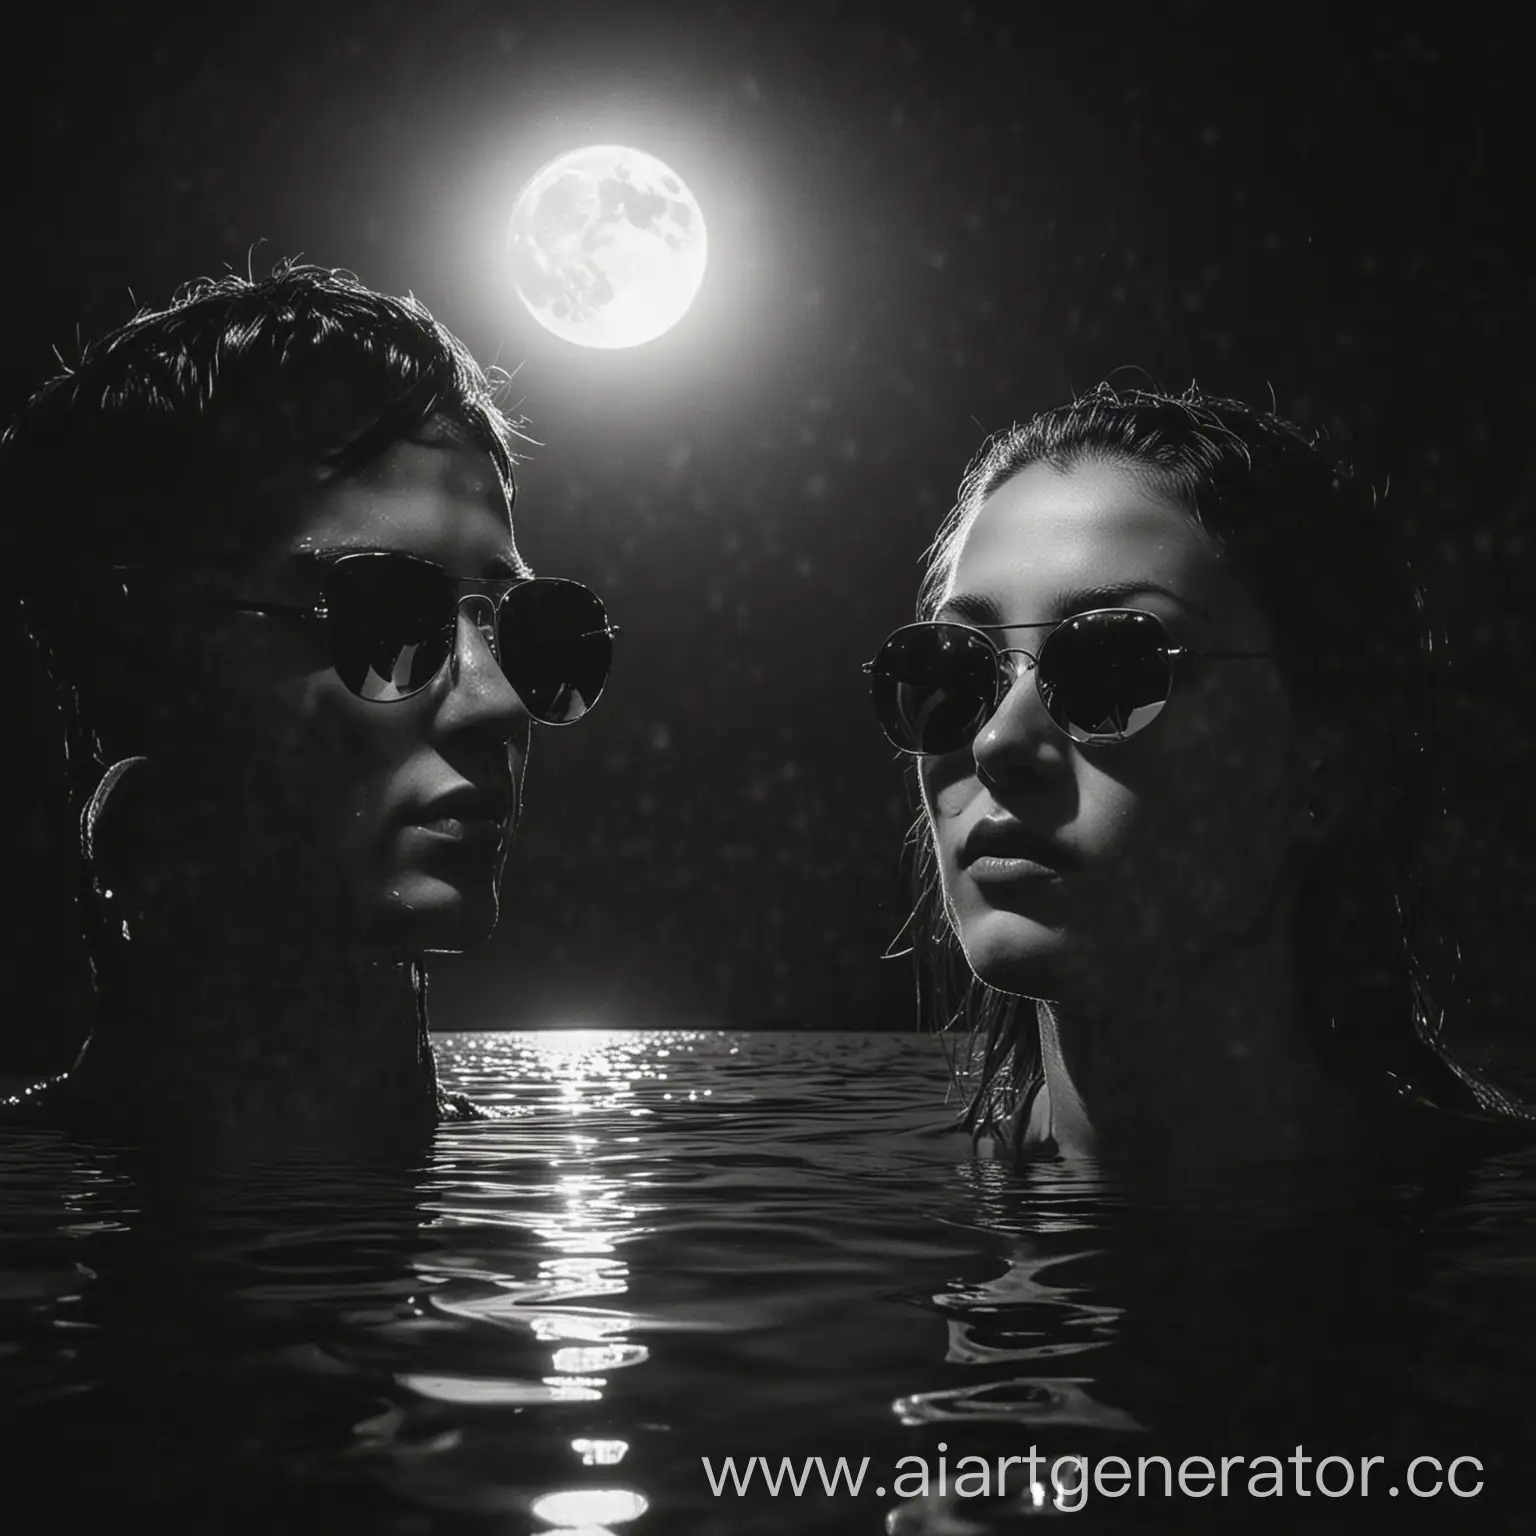 Black and white image featuring the illuminated heads of two individuals against a dark background. One wears sunglasses and the other has a partially obscured face with a piercing gaze. A full moon is prominently visible in the sky, casting light onto a reflective water surface below.